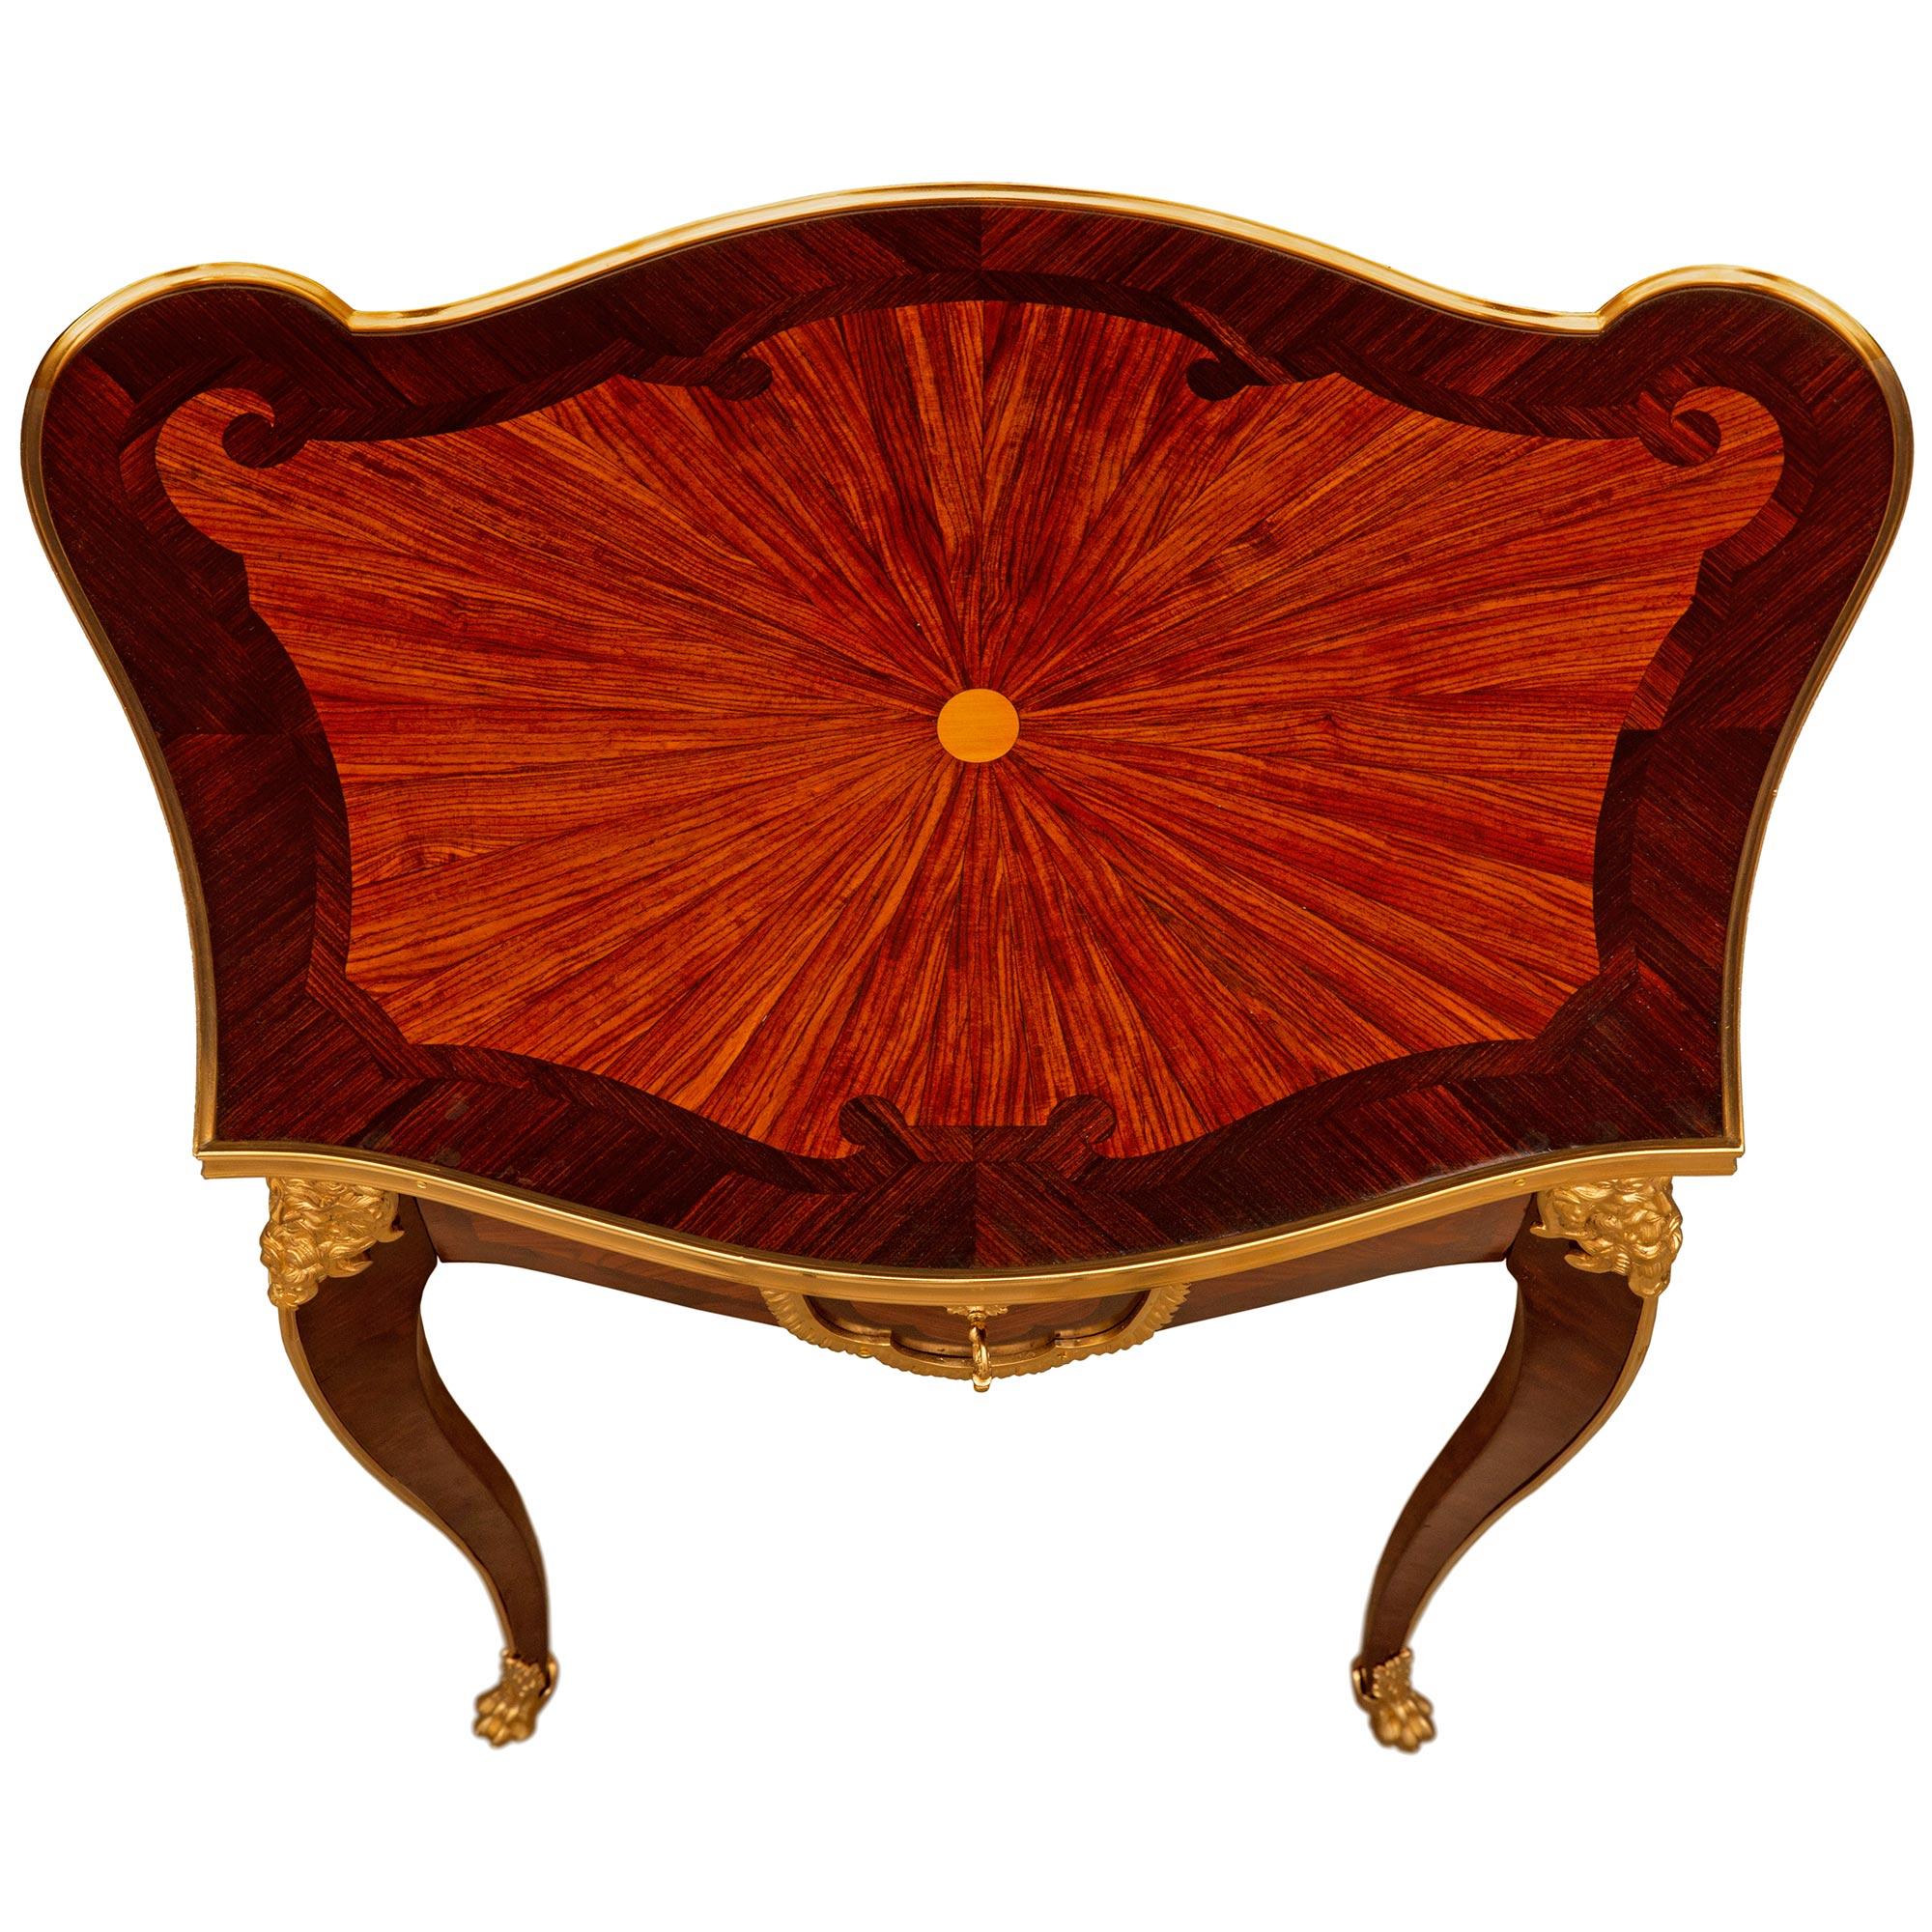 A uniquely shaped and high quality French 19th century Belle Epoque period Louis XV st. Tulipwood, Kingwood and ormolu side table. The table is raised by four slender cabriole legs decorated with a top ormolu mount of a bearded masculine mask above